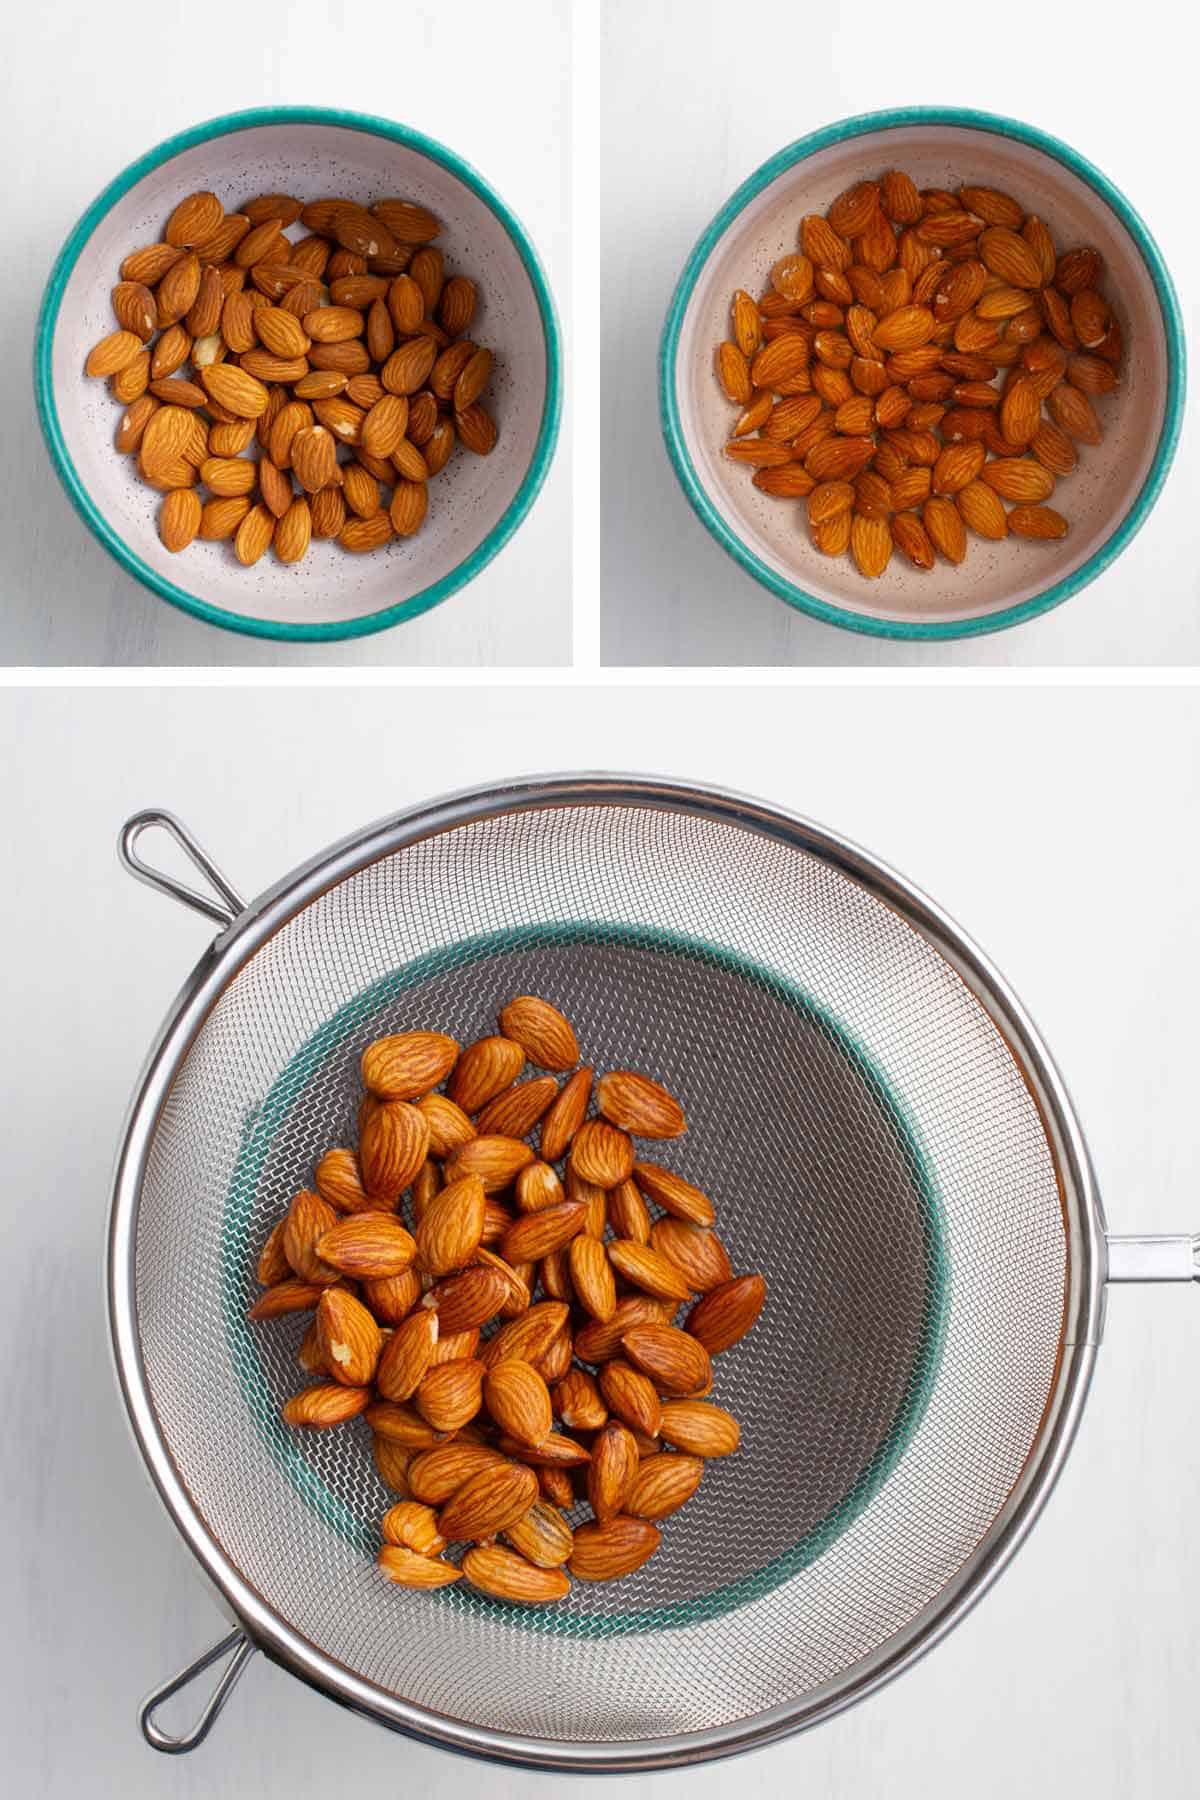 Bowl of almonds, bowl of almonds soaking in water, and soaked almonds being drained in a wire colander.